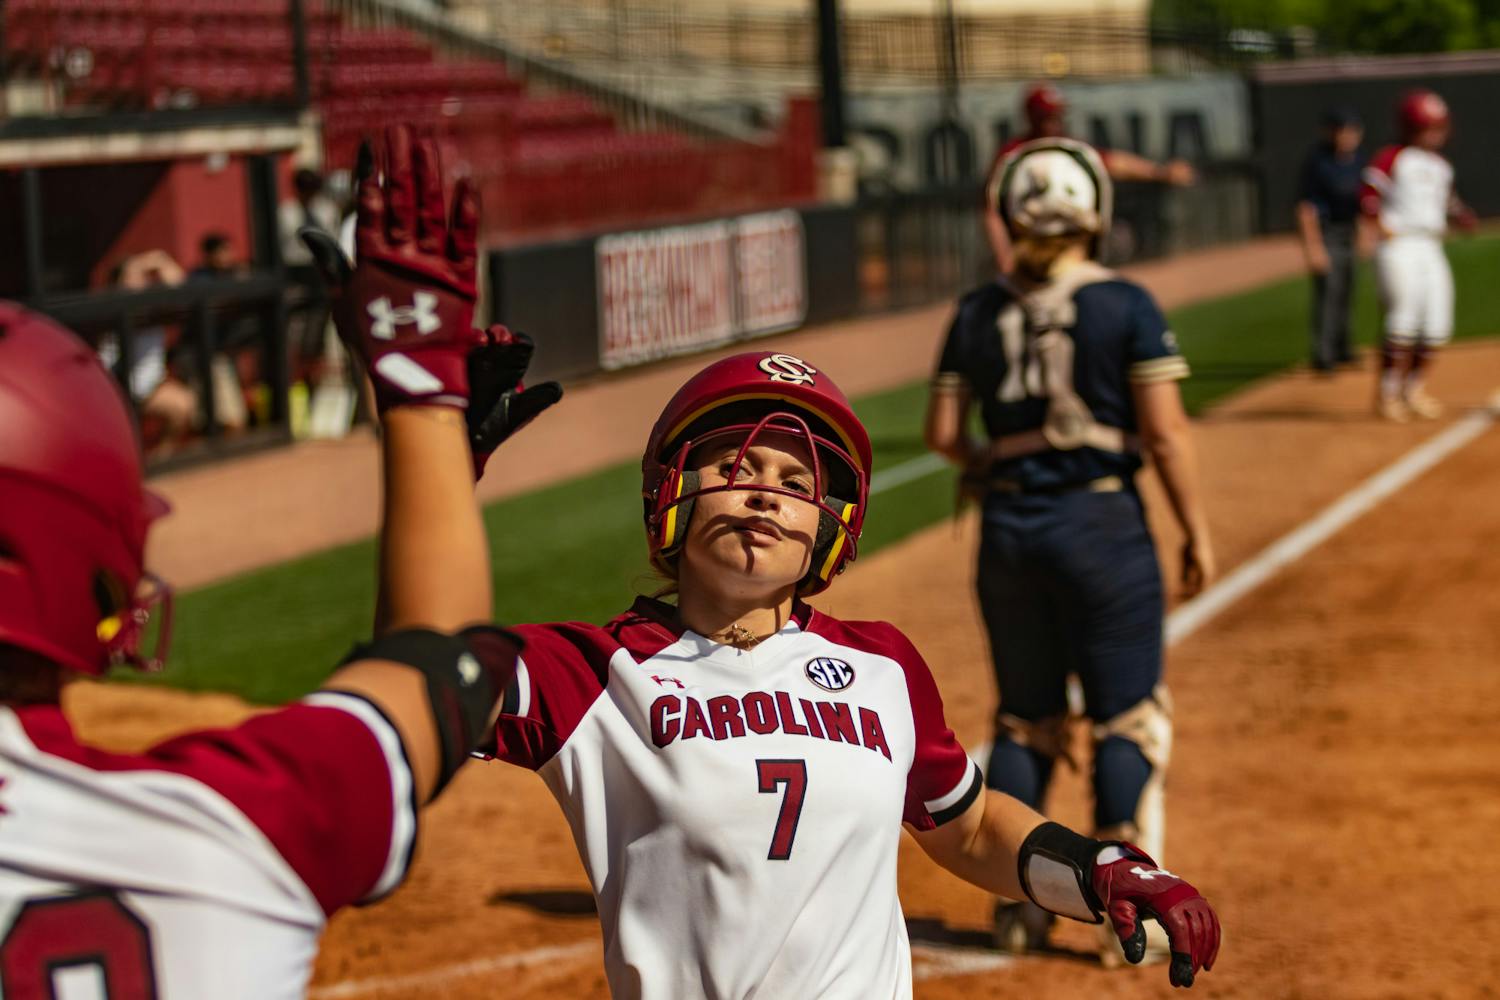 Sophomore catcher and infielder Giulia Desiderio scores and receives a high five from a teammate during the first game against Charleston Southern at Beckham Field on April 19, 2023. This was one of five runs that the Gamecocks scored against the Buccaneers, winning 5-0. &nbsp;